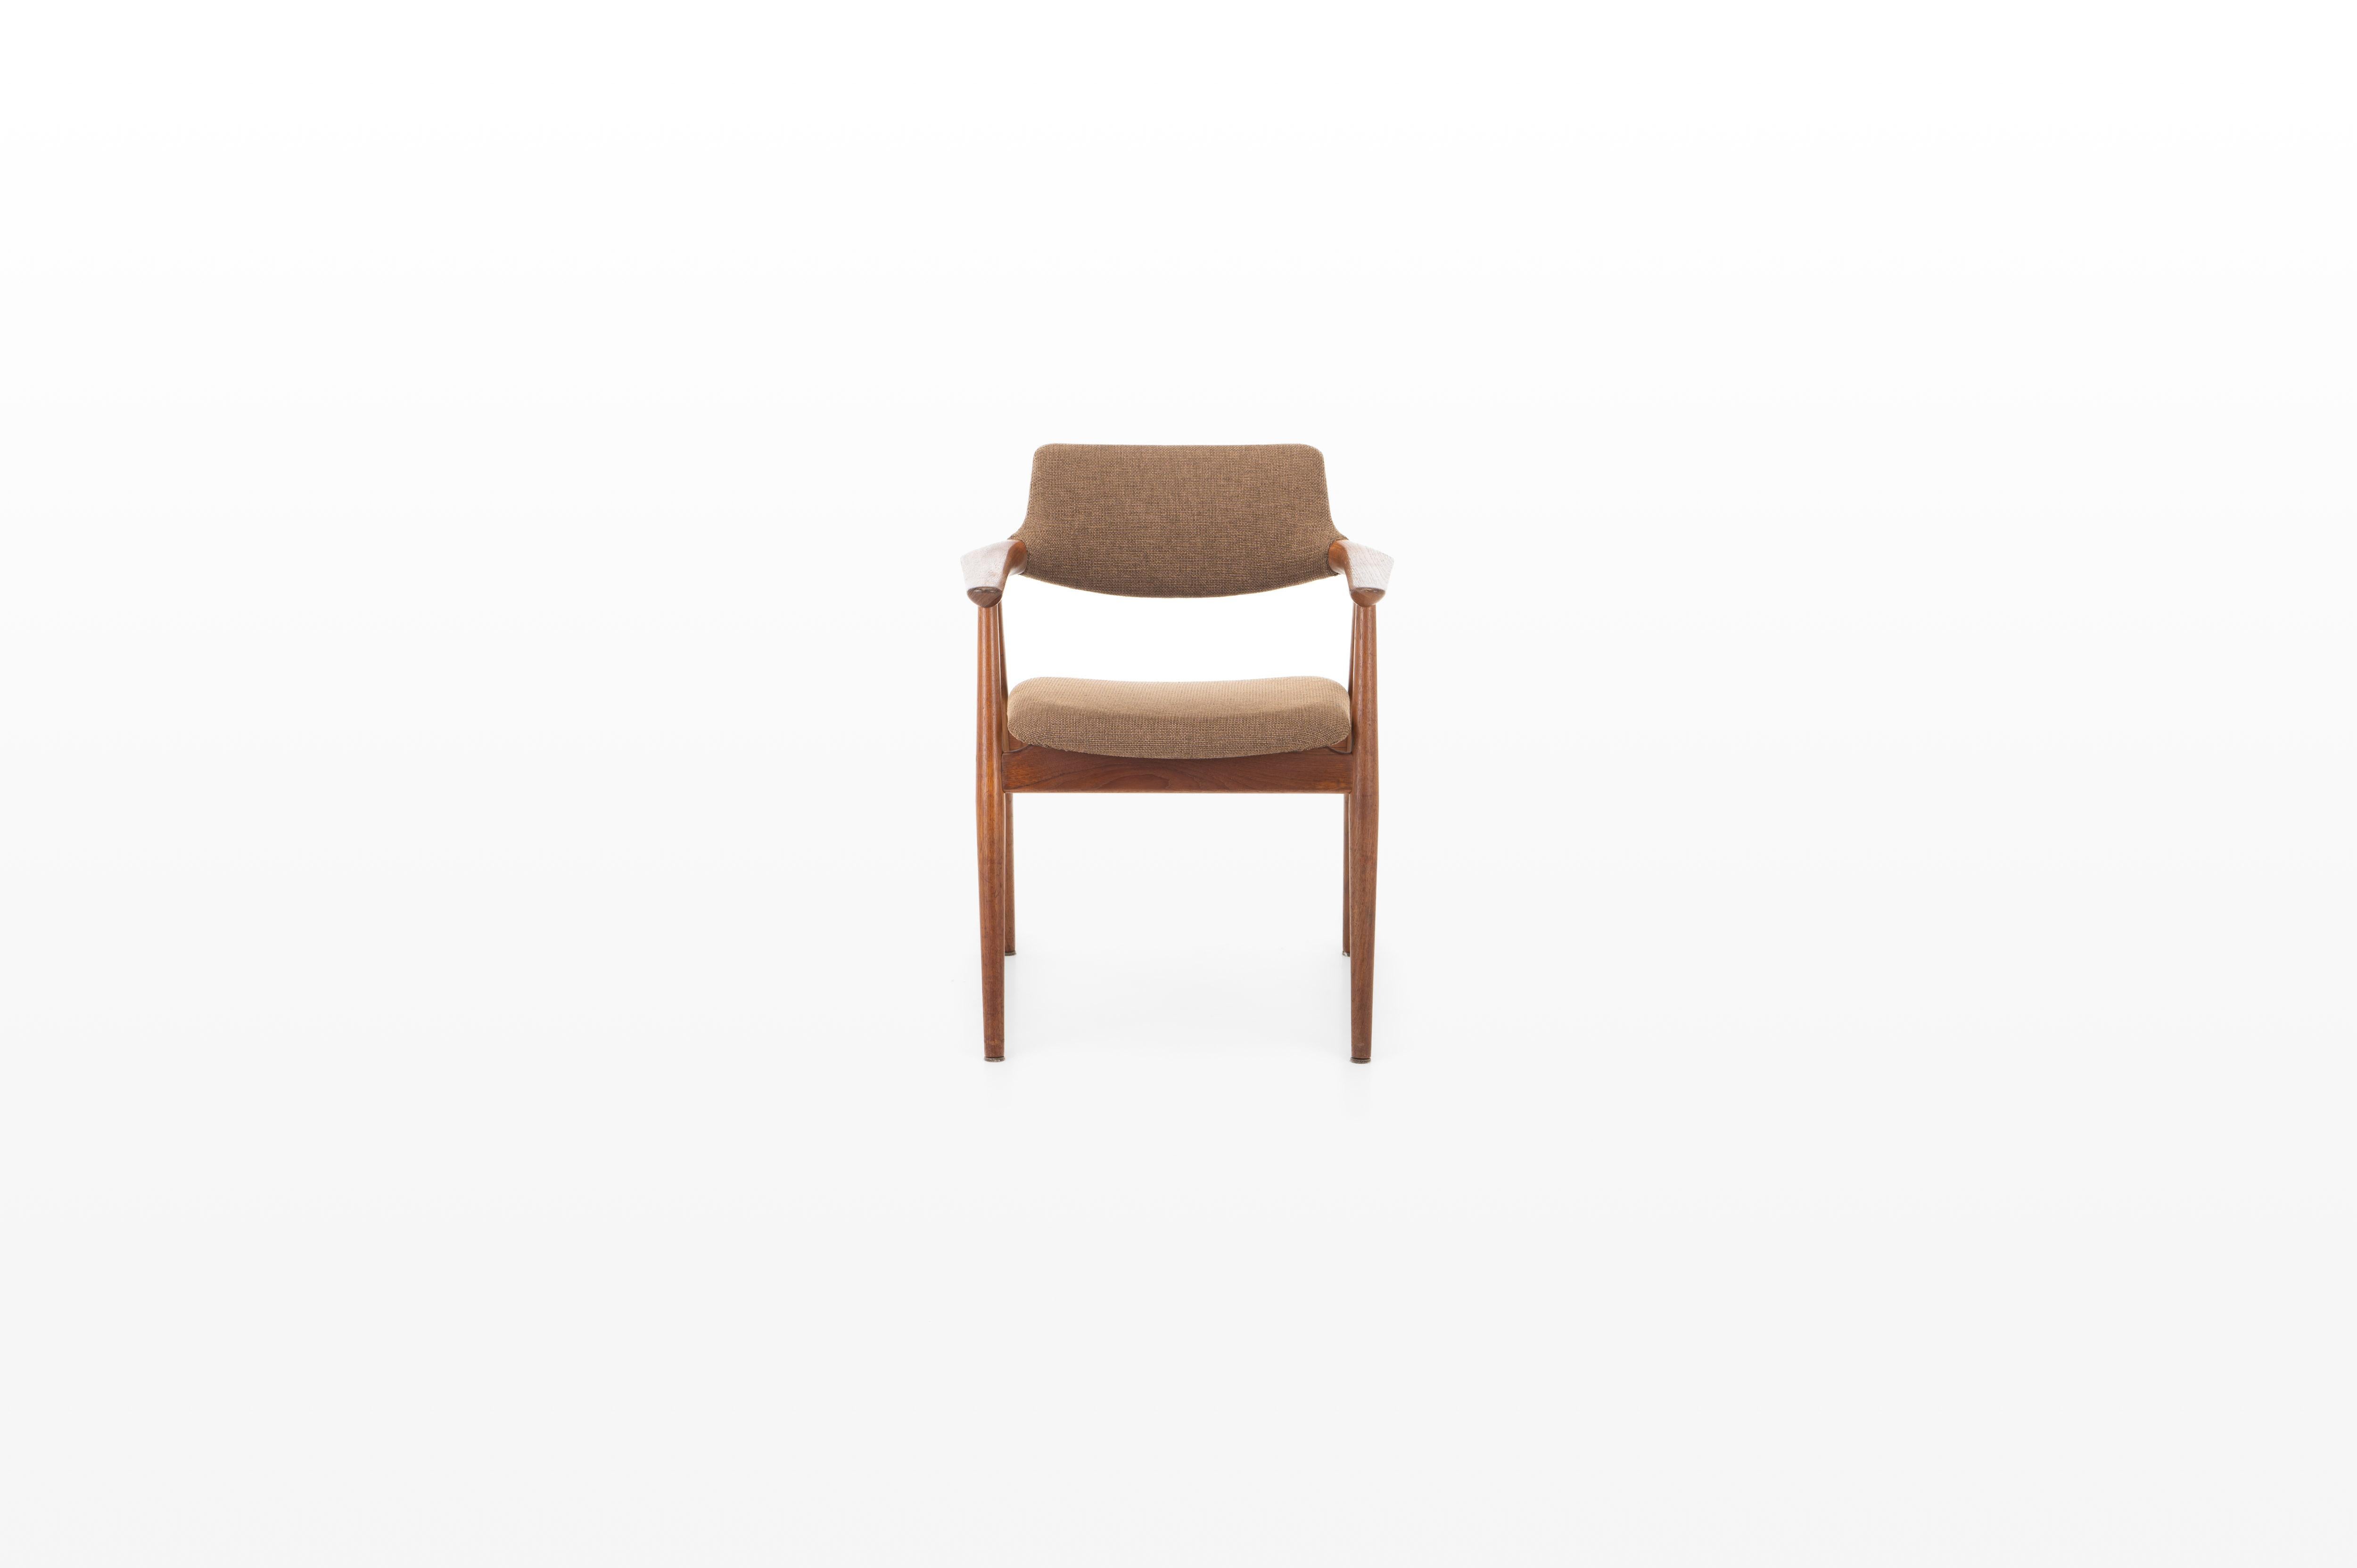 Danish armchair by Svend Åge Eriksen for Glostrup, Denmark 1960s. The chair is made of teak and is in great original condition.